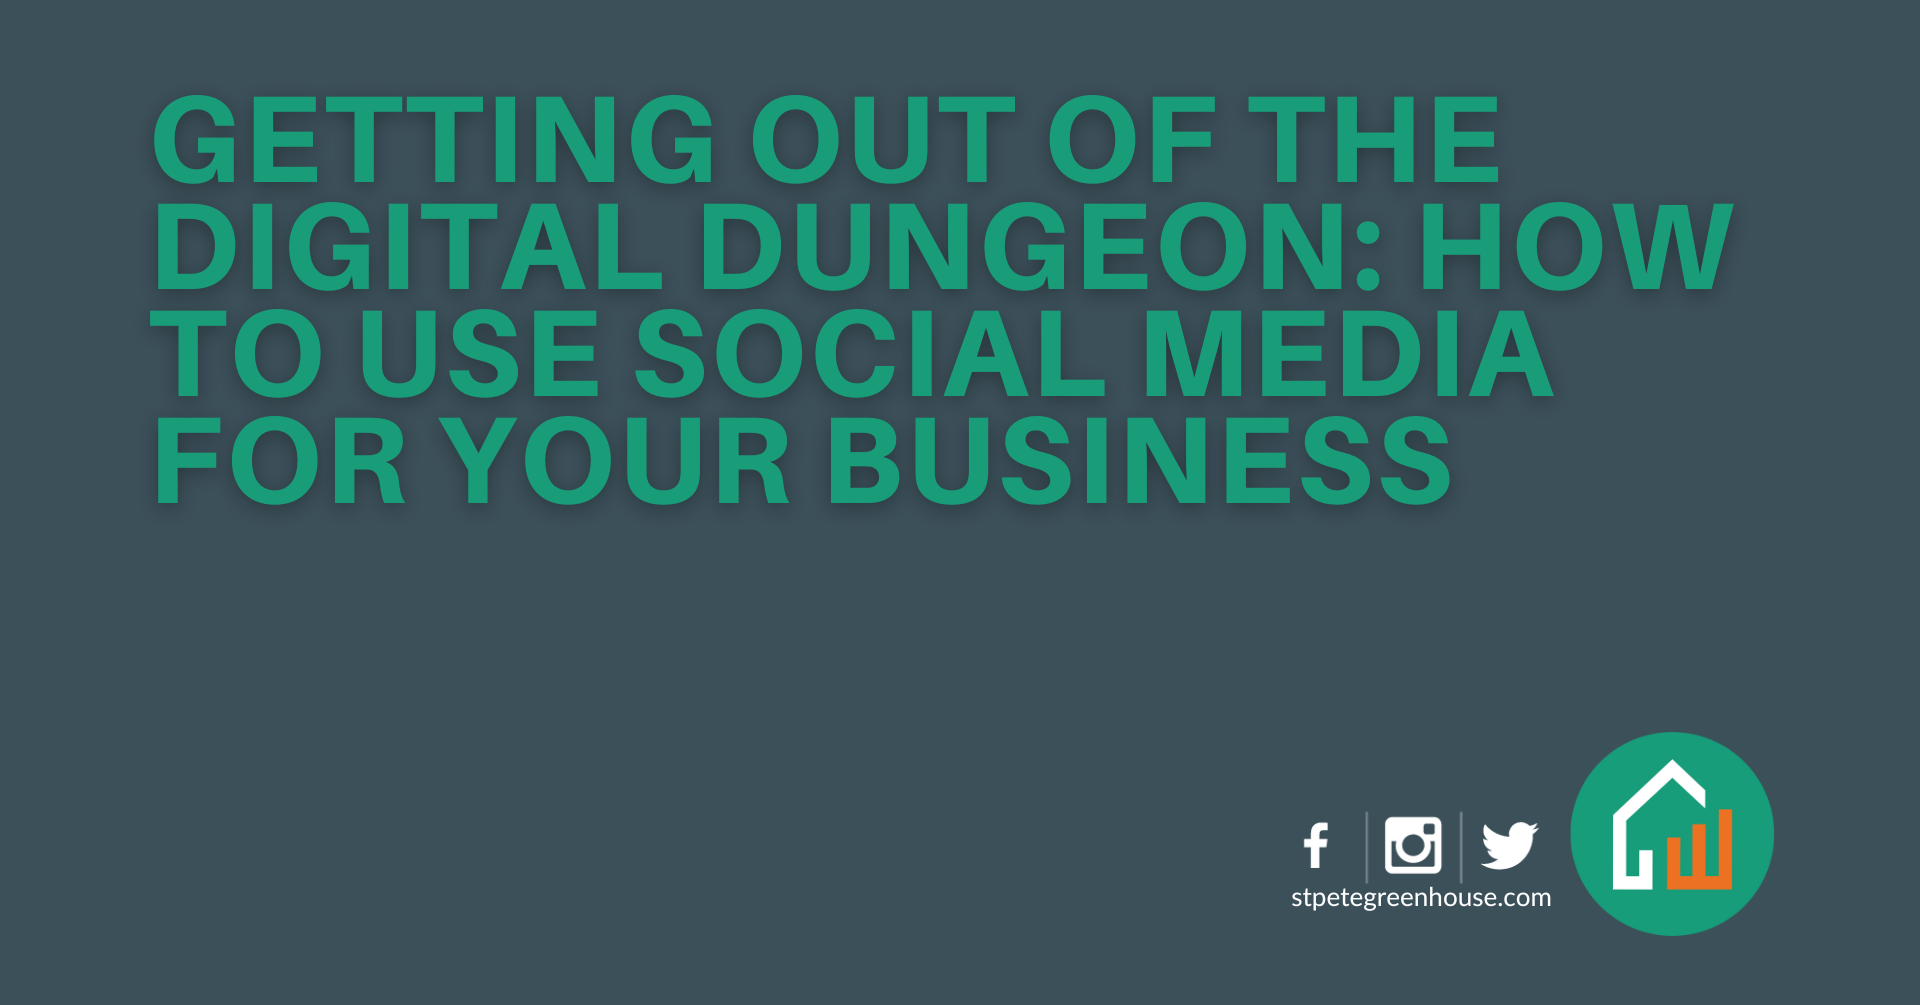 Getting Out of The Digital Dungeon: How to Use Social Media for Your Business-image